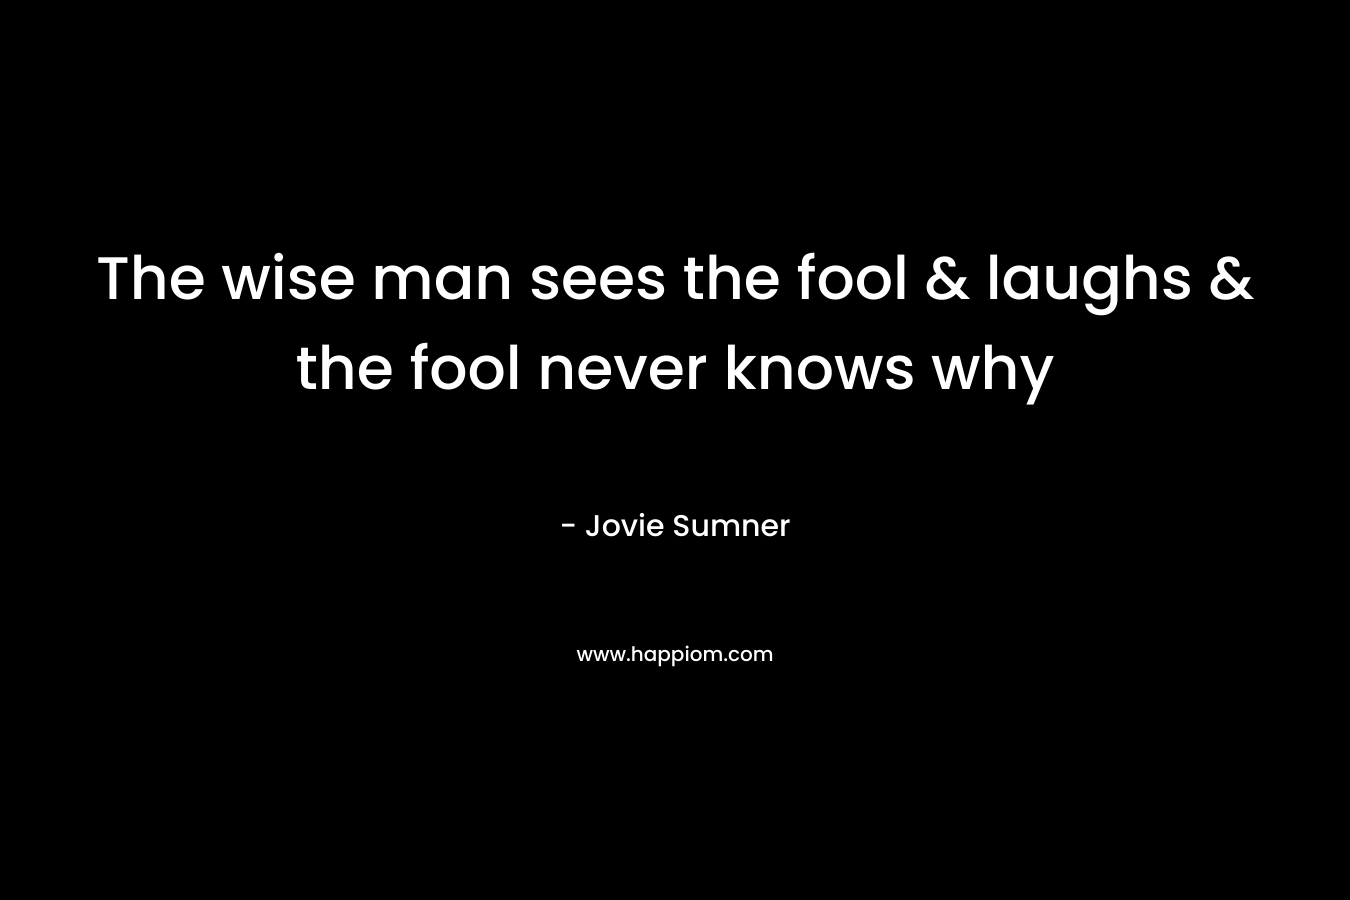 The wise man sees the fool & laughs & the fool never knows why